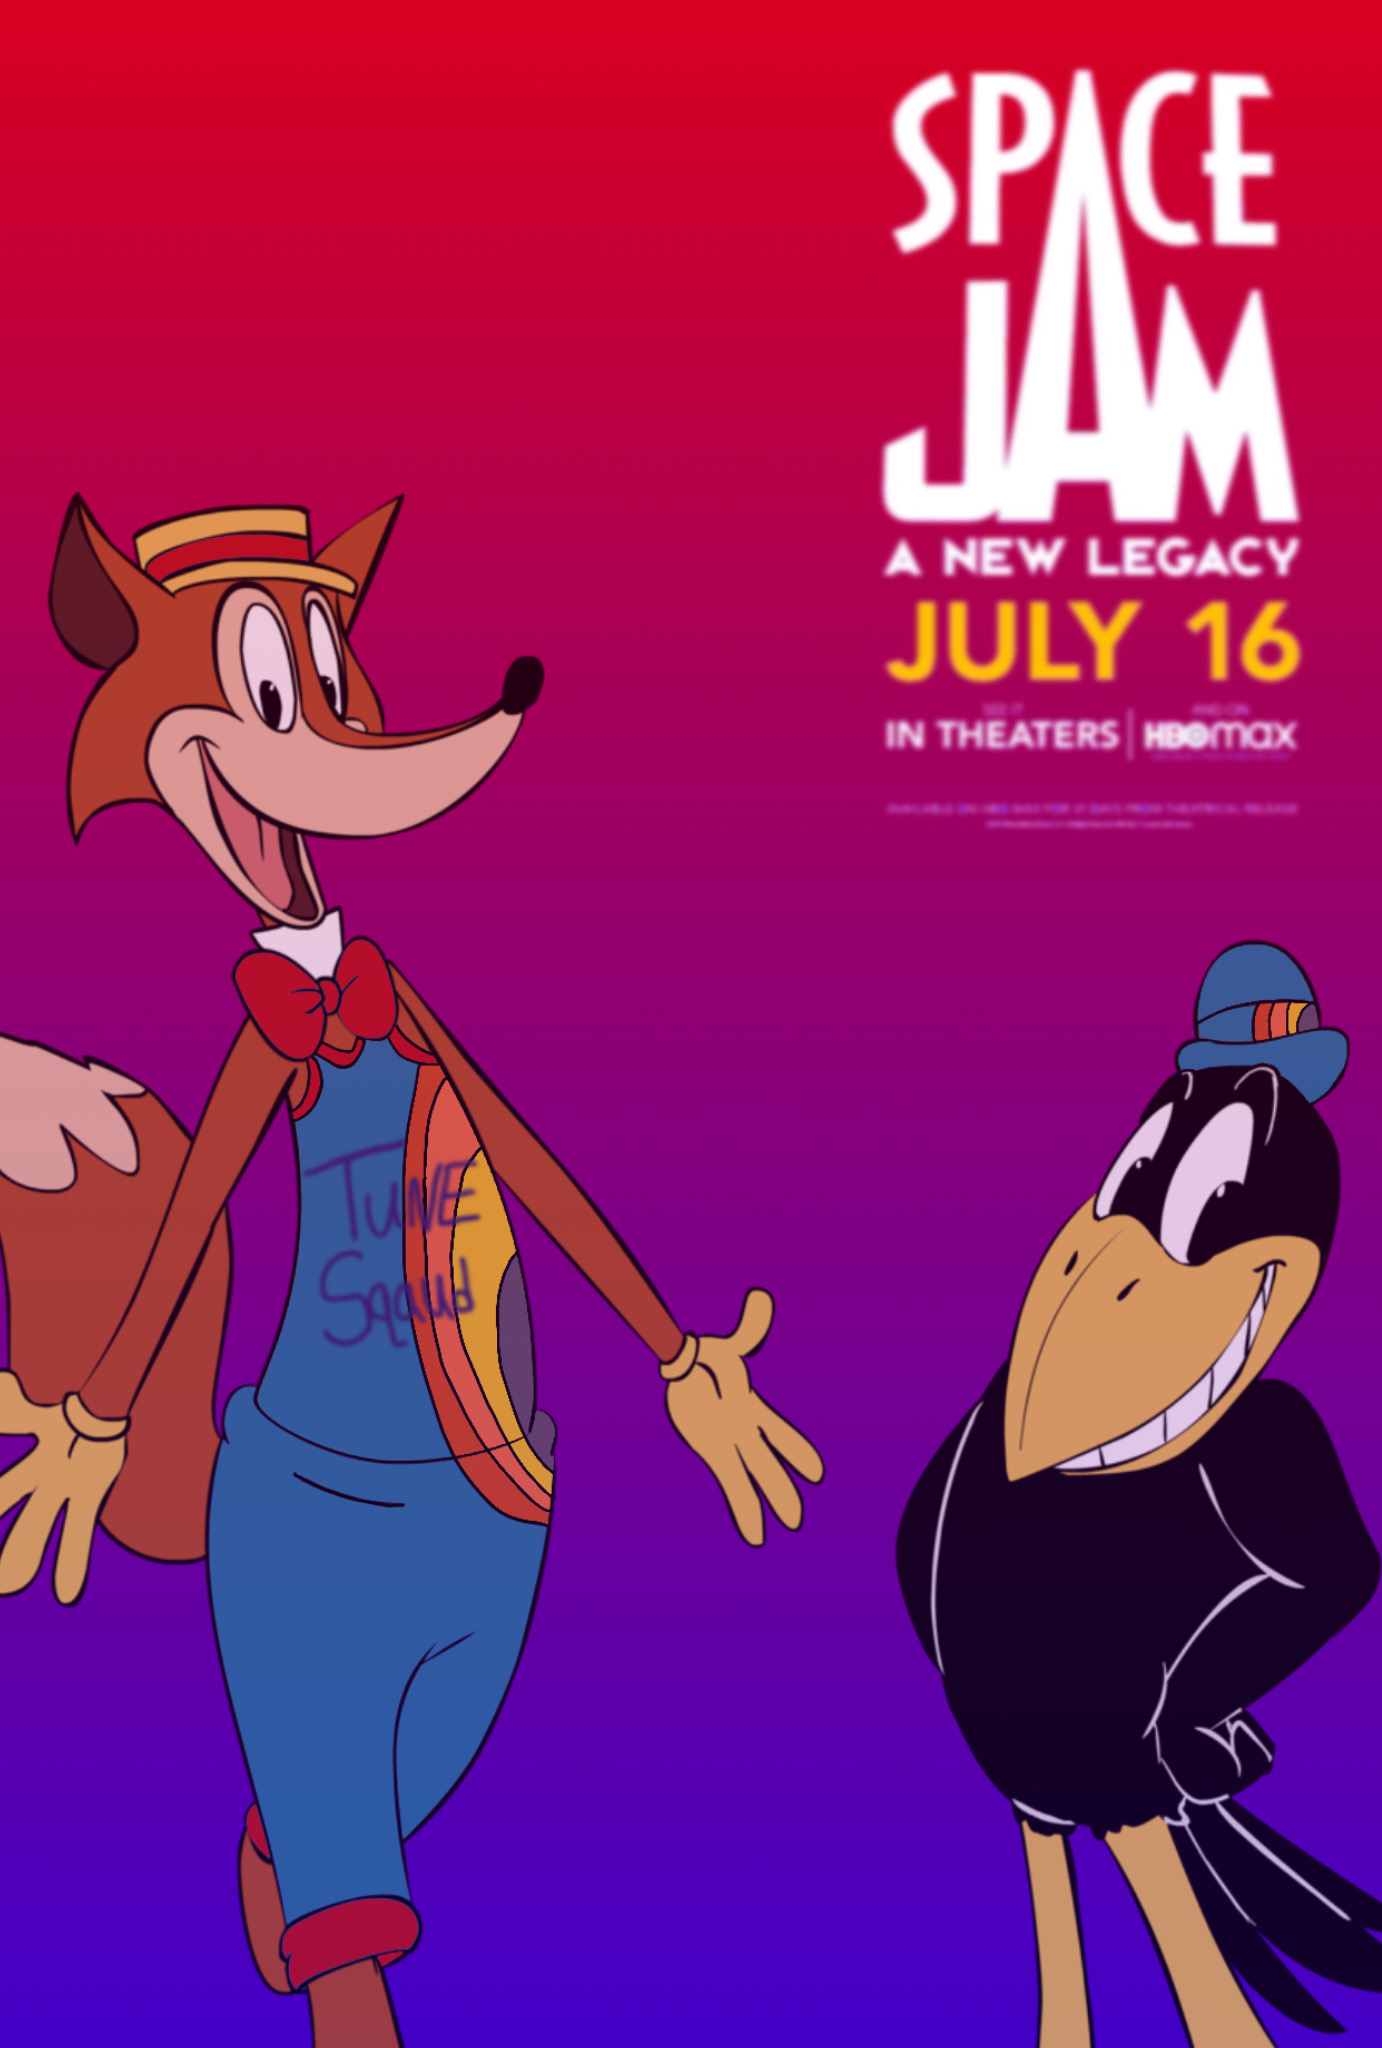 Fox and Crow Poster by RJToons on DeviantArt